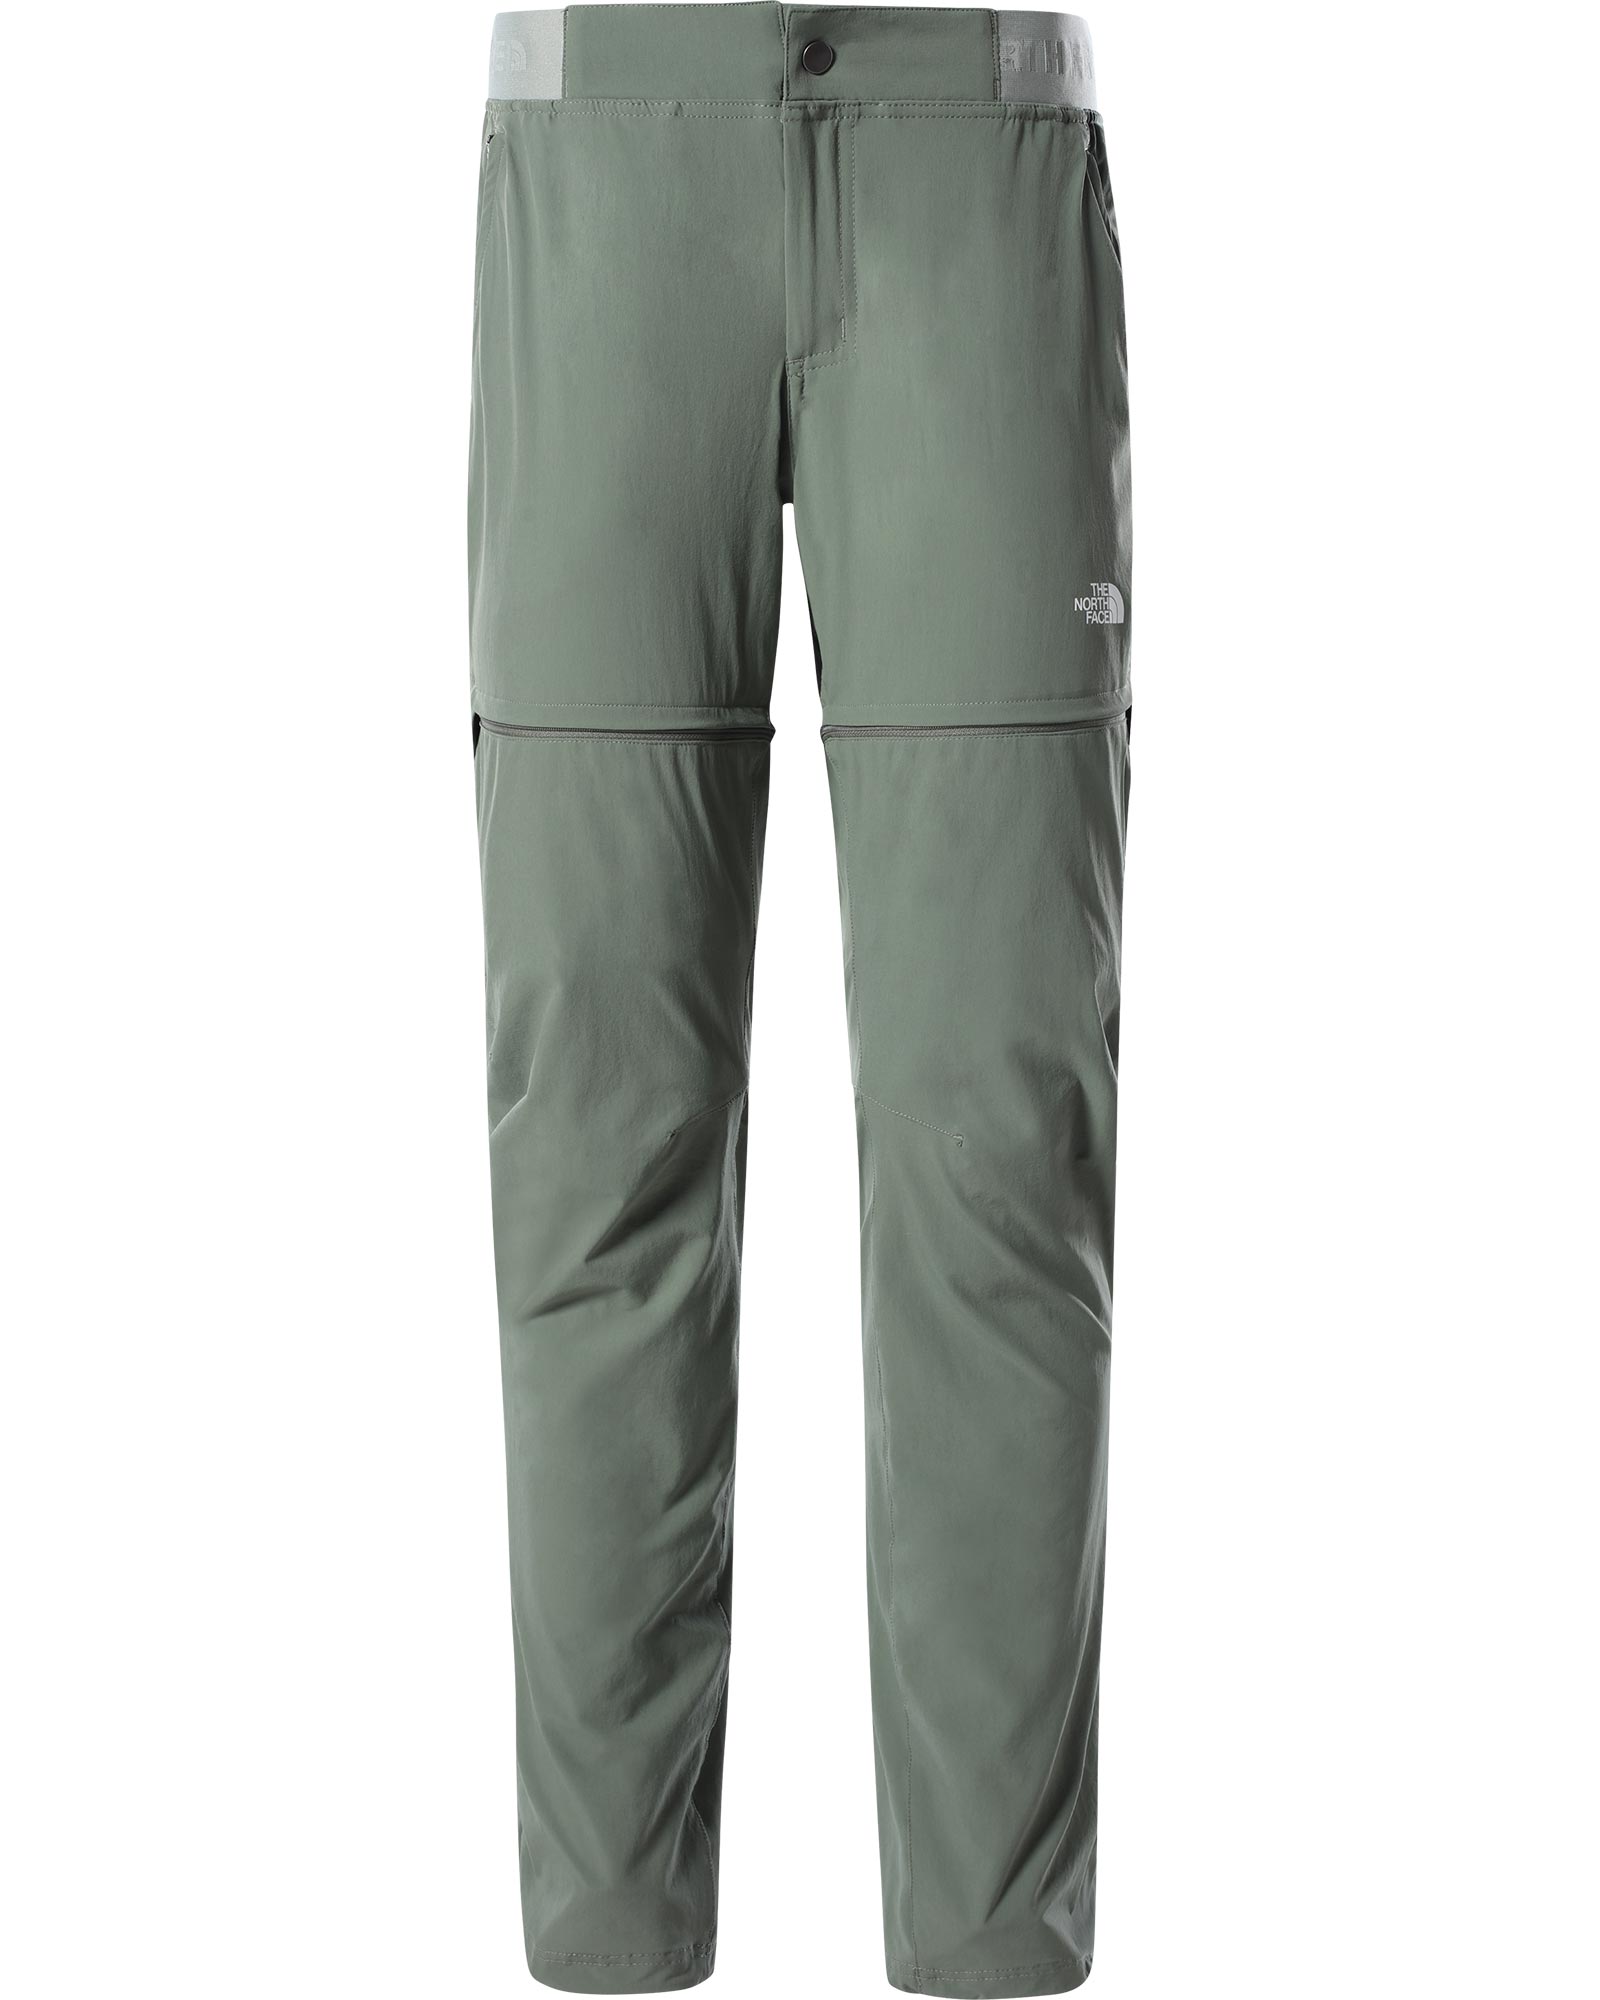 The North Face Speedlight Convertible Women’s Pants - Agave Green 16